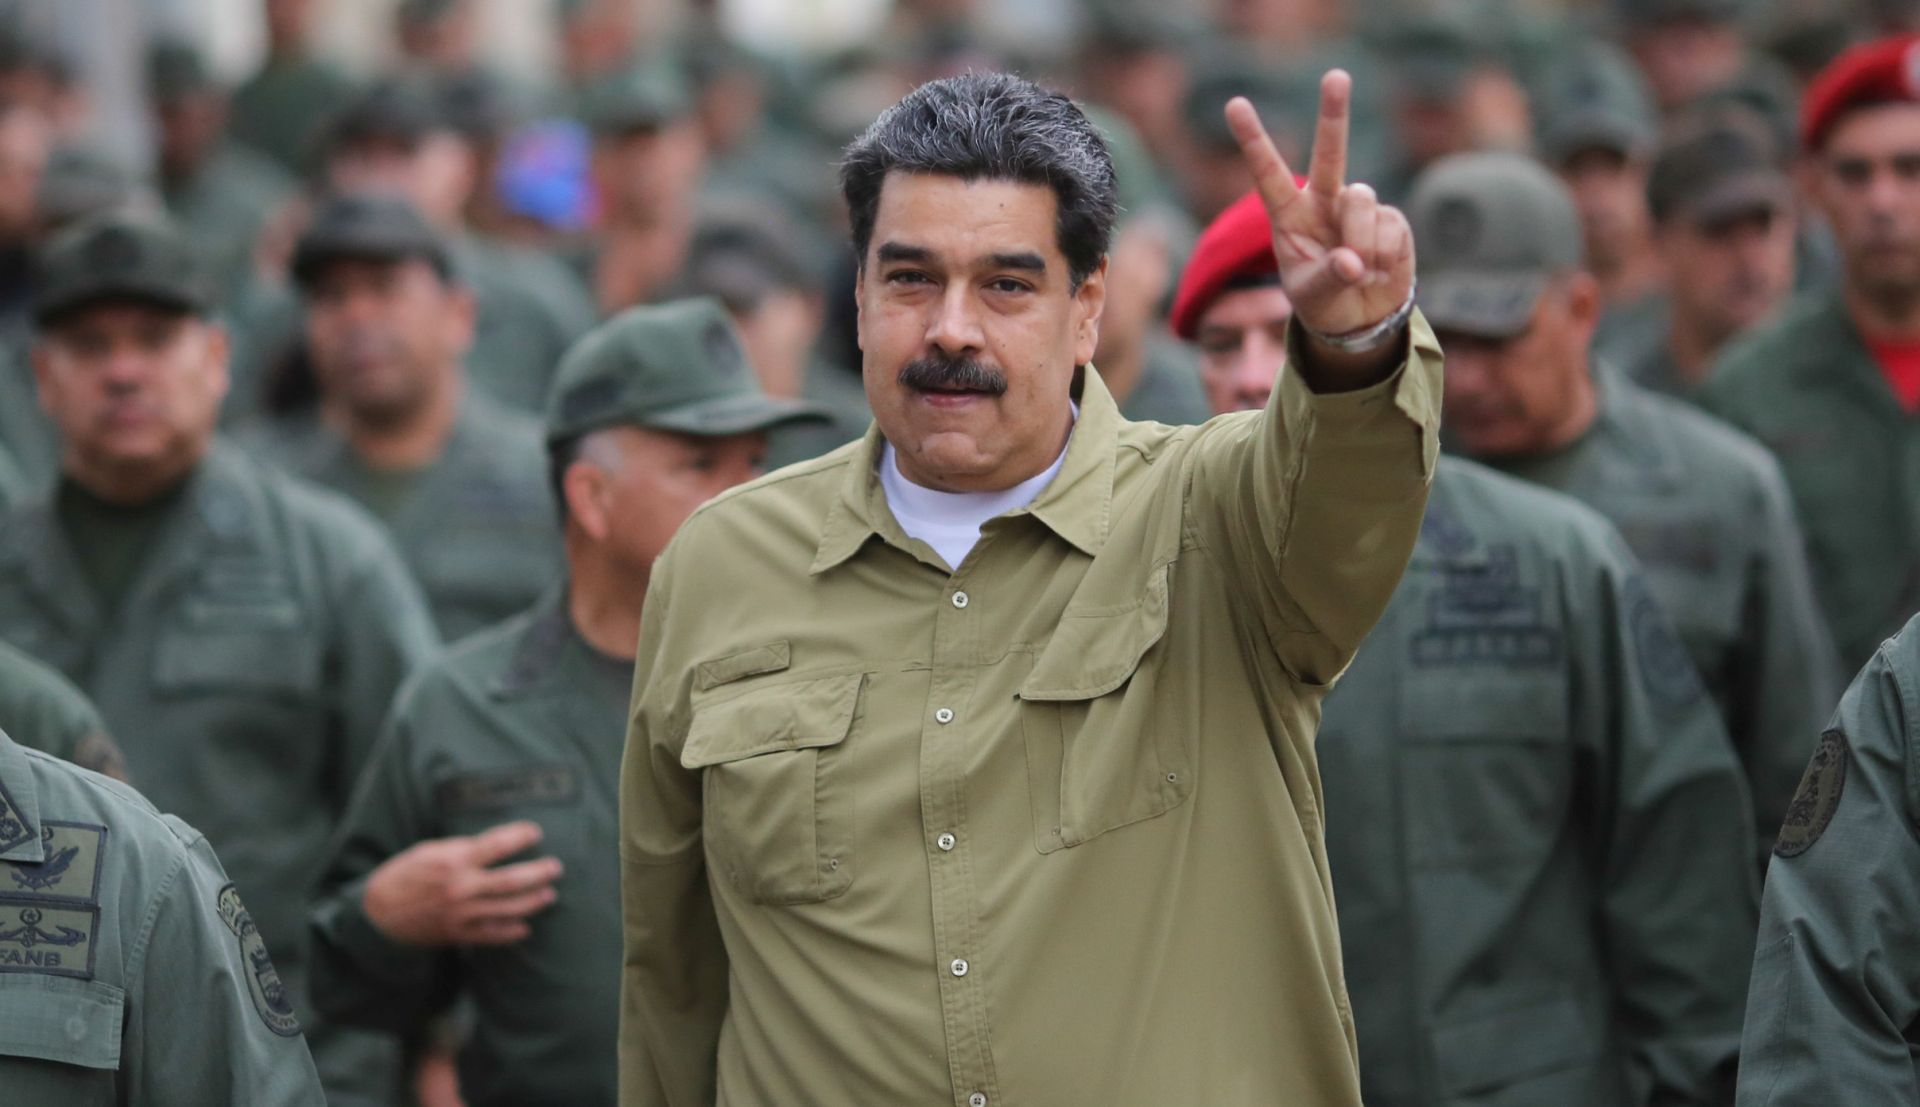 epa07332221 A handout picture provided by Miraflores press shows the Venezuelan President Nicolas Maduro during an event with the members of the Bolivarian National Armed Force in Caracas, Venezuela, on 30 January 2019.  EPA/PRENSA MIRAFLORES / HANDOUT  HANDOUT EDITORIAL USE ONLY/NO SALES